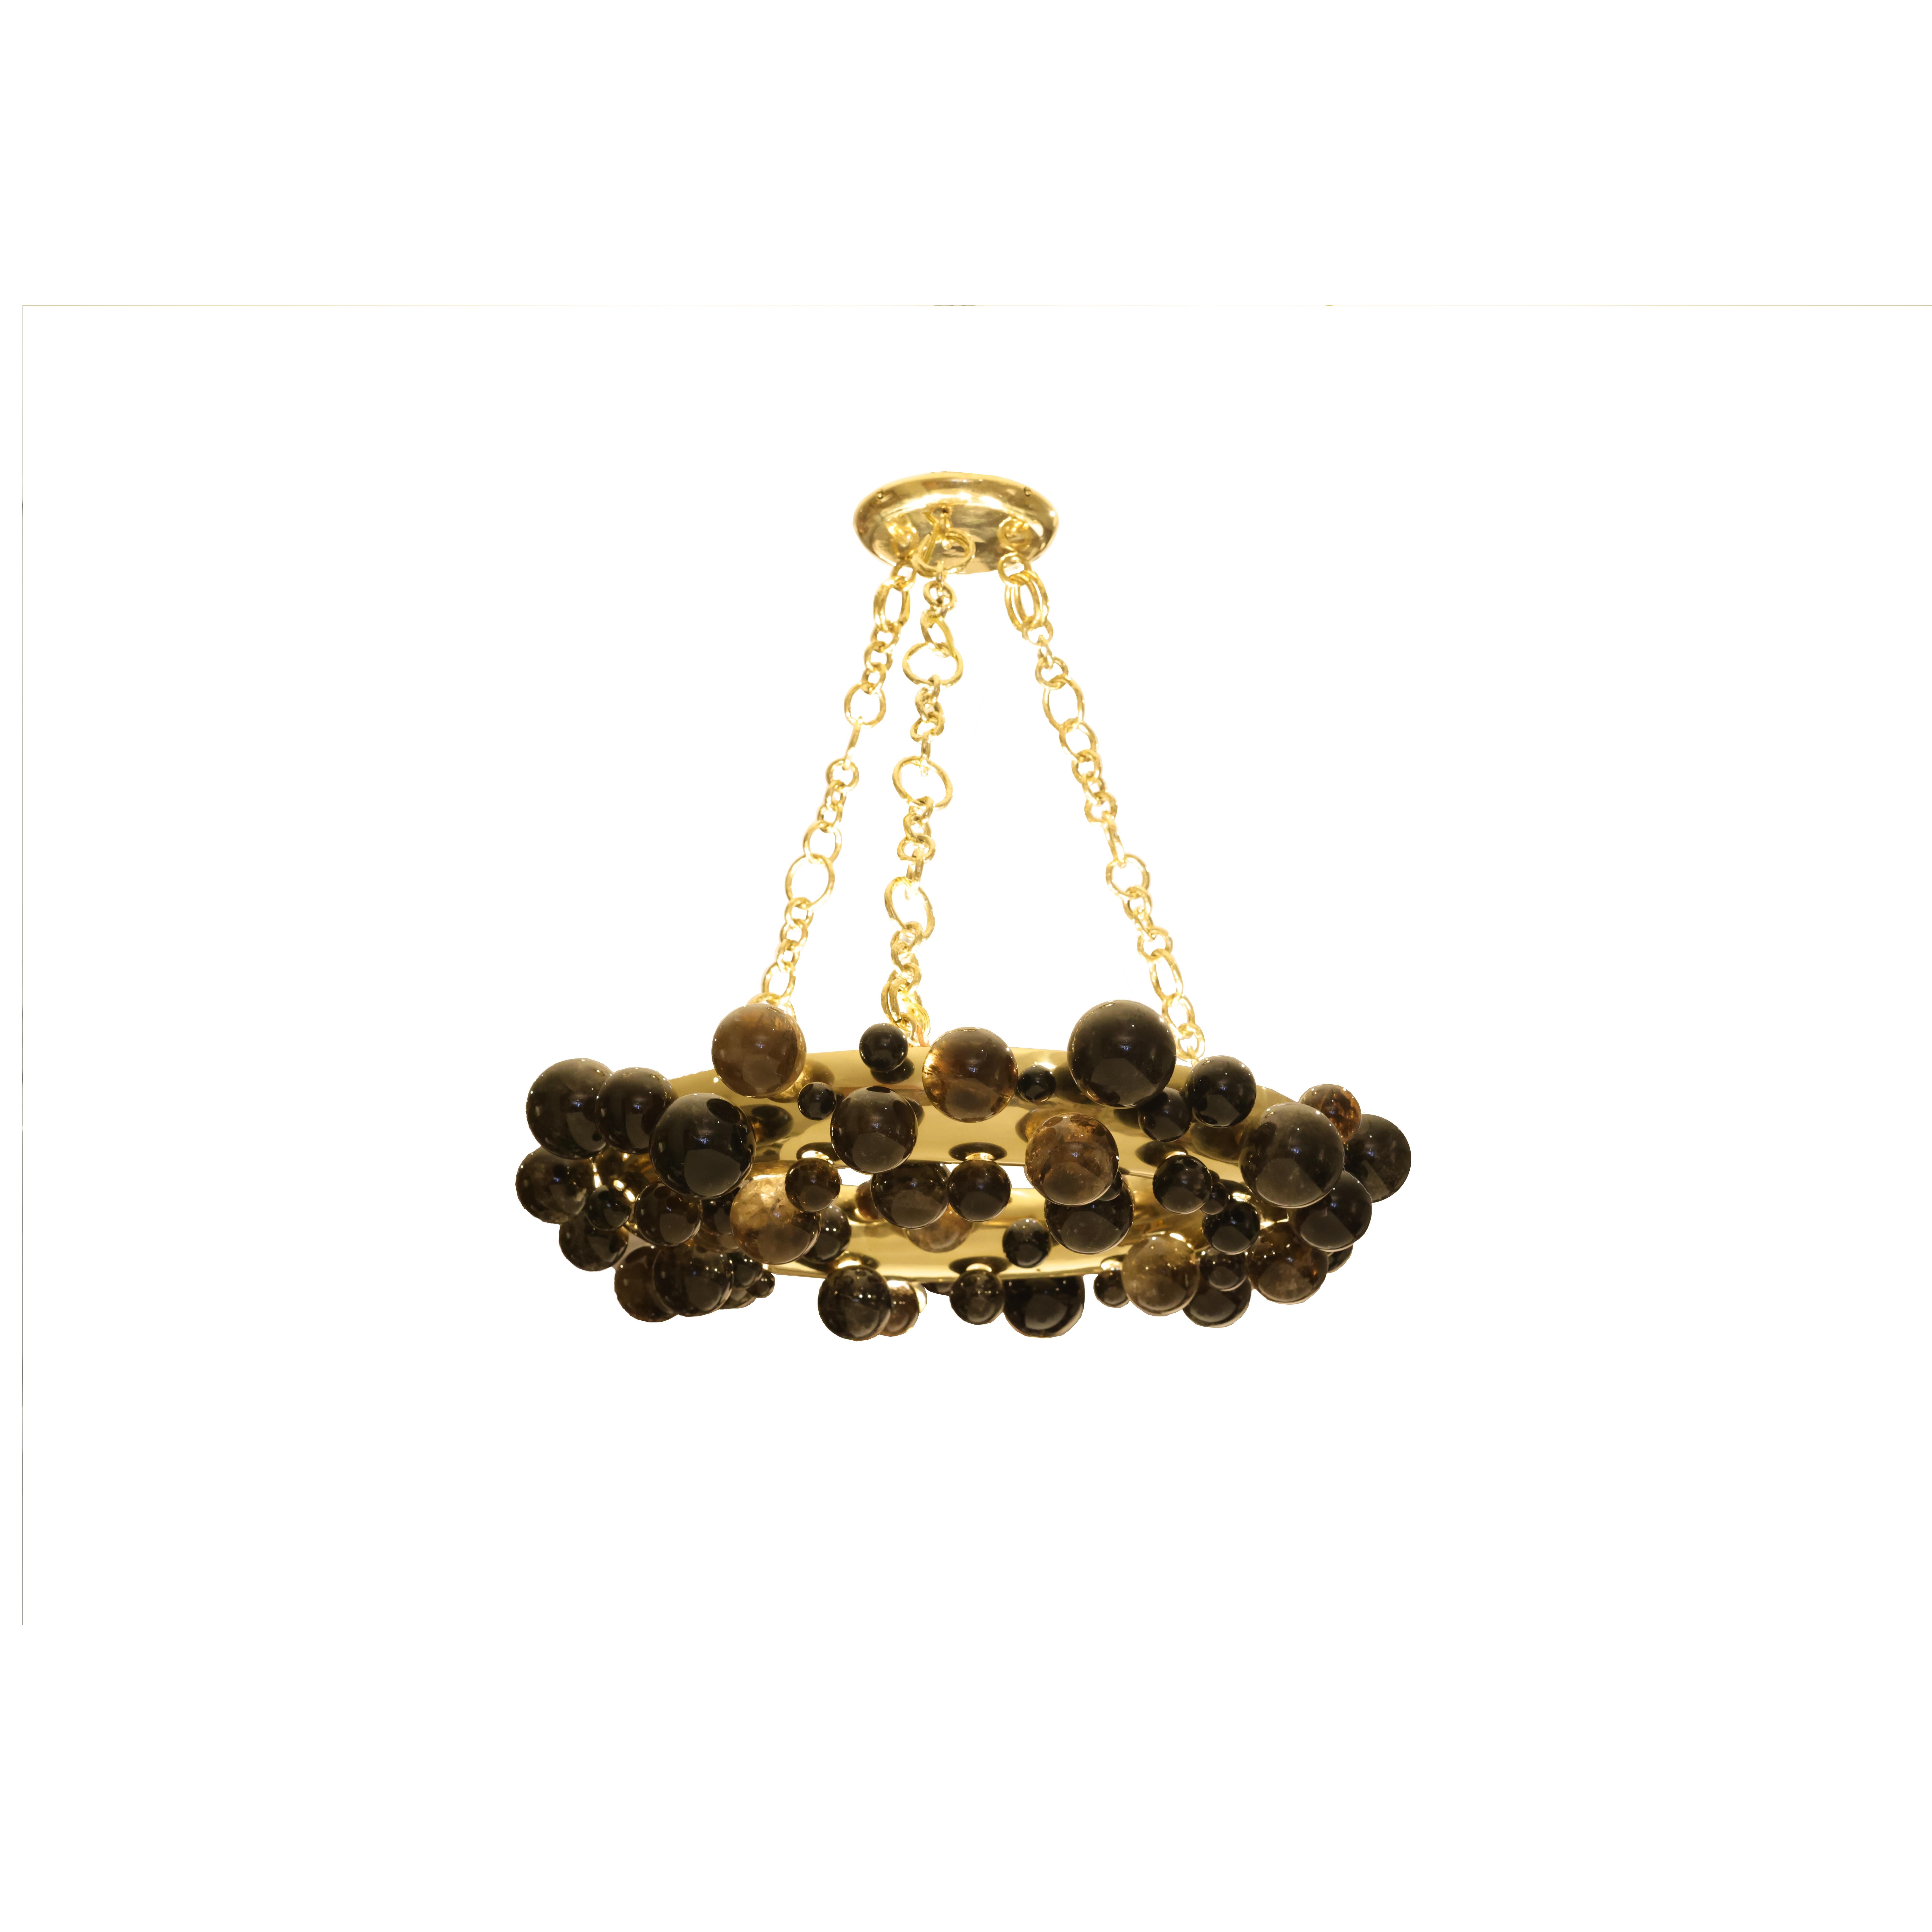 Bubble ring rock crystal chandelier by Phoenix with polish brass frame. Created by Phoenix Gallery, NYC.
Each chandelier install 10 sockets. Use 60w LED warm light bulbs. Total of 600w. 
Custom size and metal finish upon request.
  